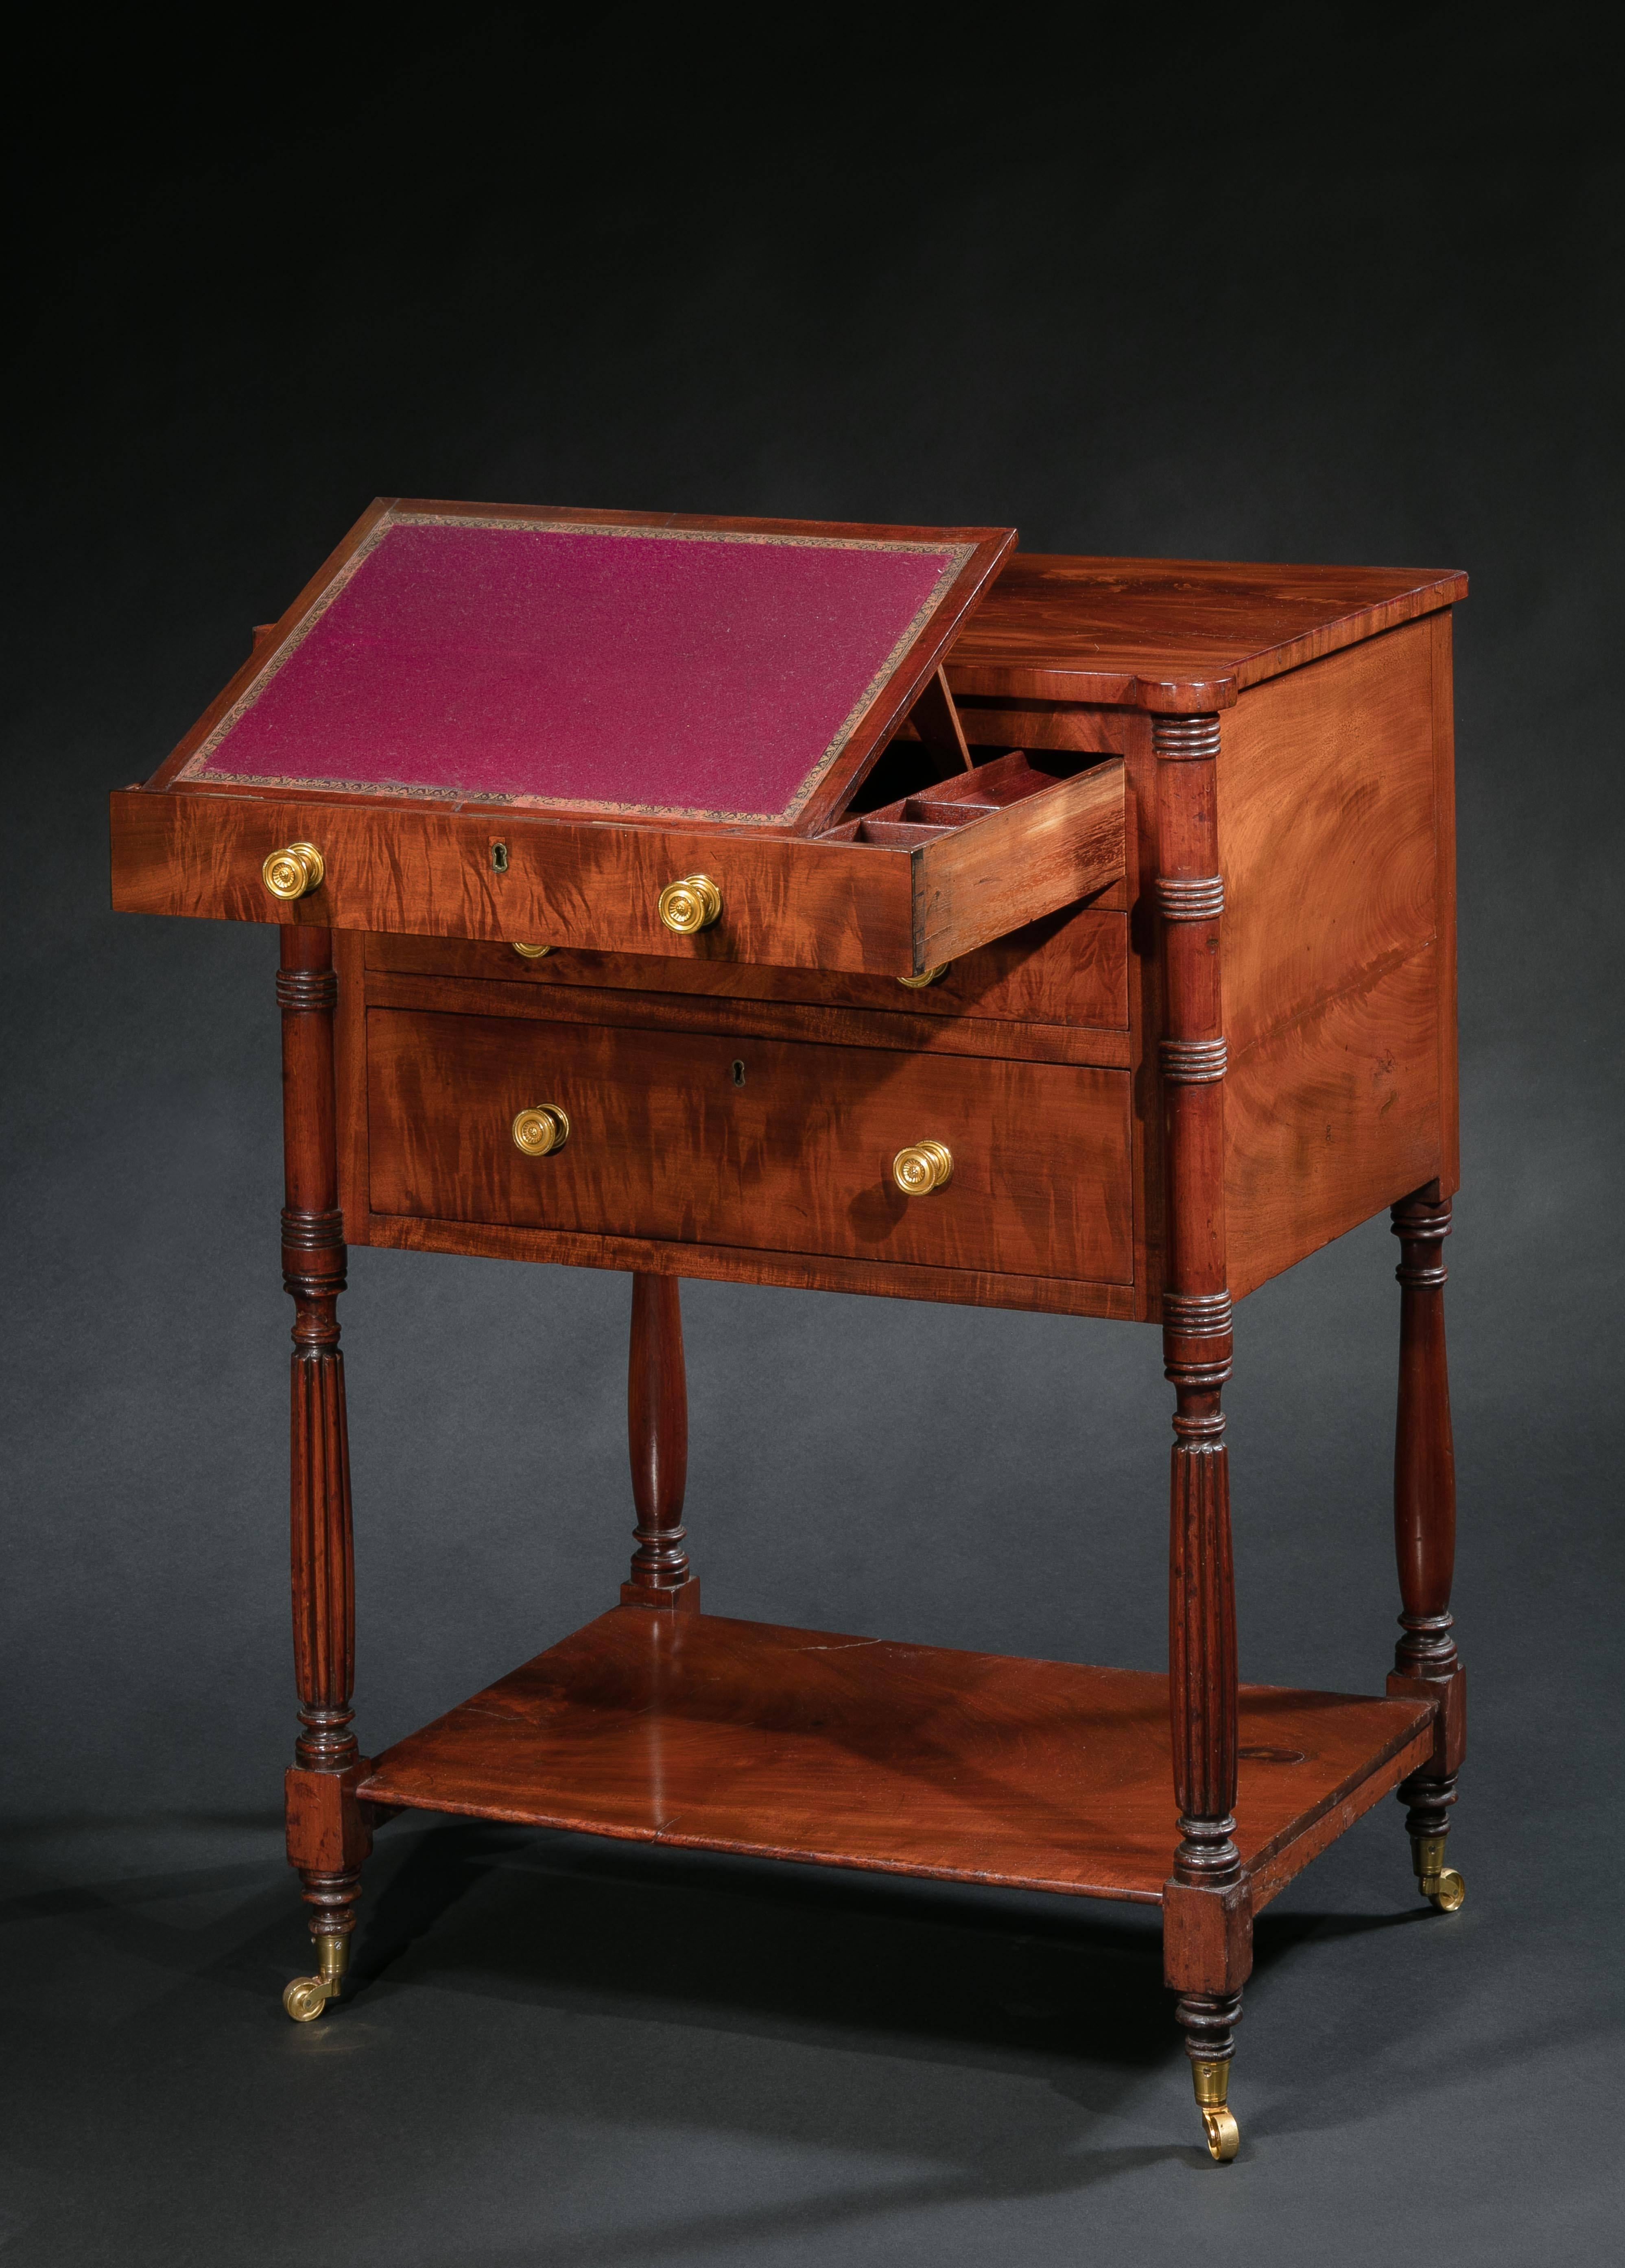 Attributed to Duncan Phyfe (1770-1854)
New York, circa 1820

The rectangular top with out-set 